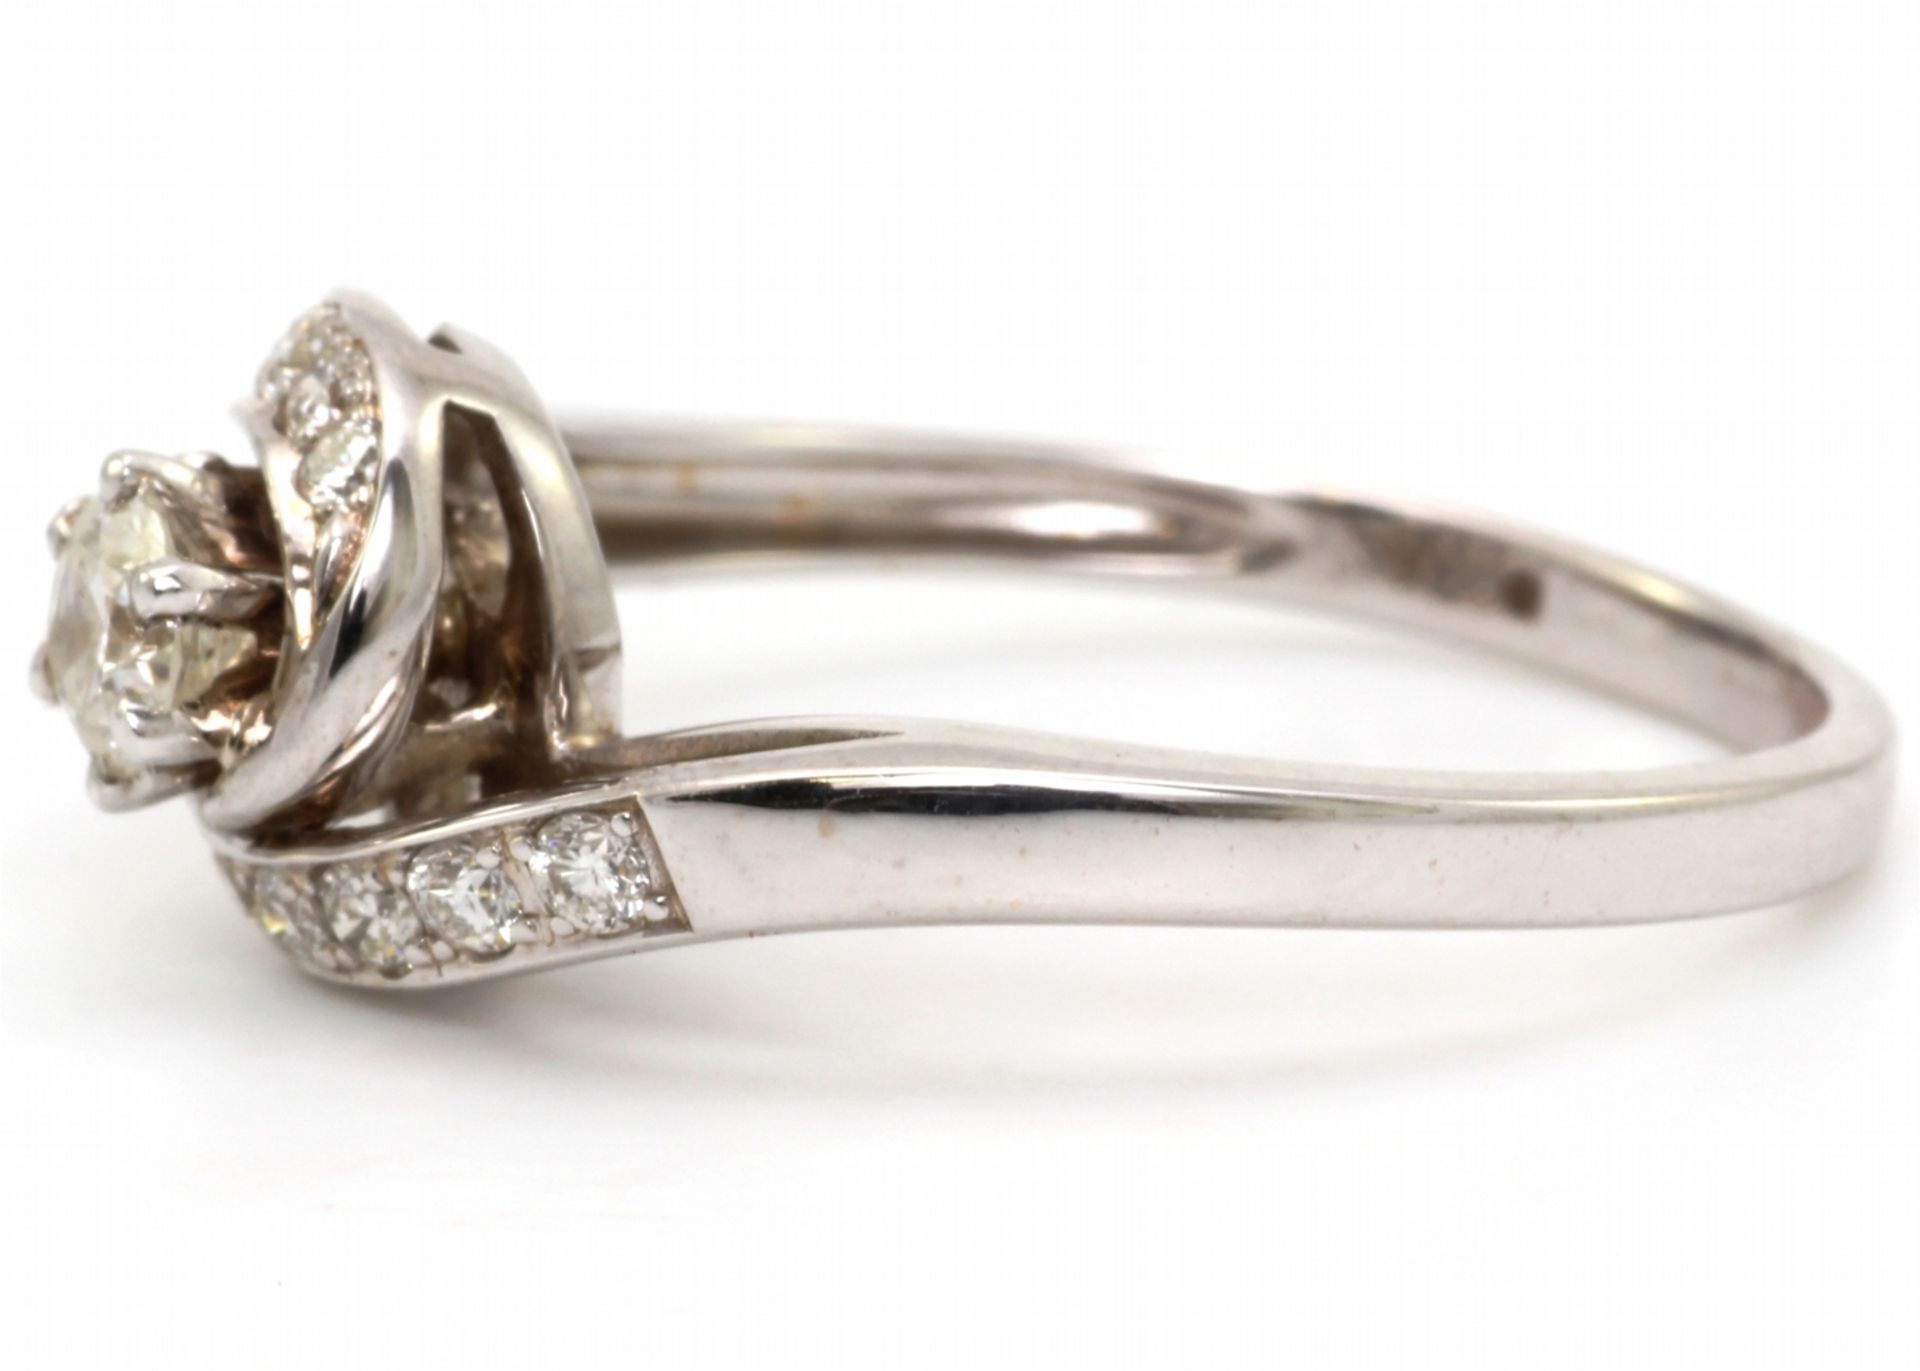 18ct White Gold Twist Shoulders Diamond Ring 0.43 Carats - Valued By AGI £5,775.00 - One sparkling - Image 4 of 6